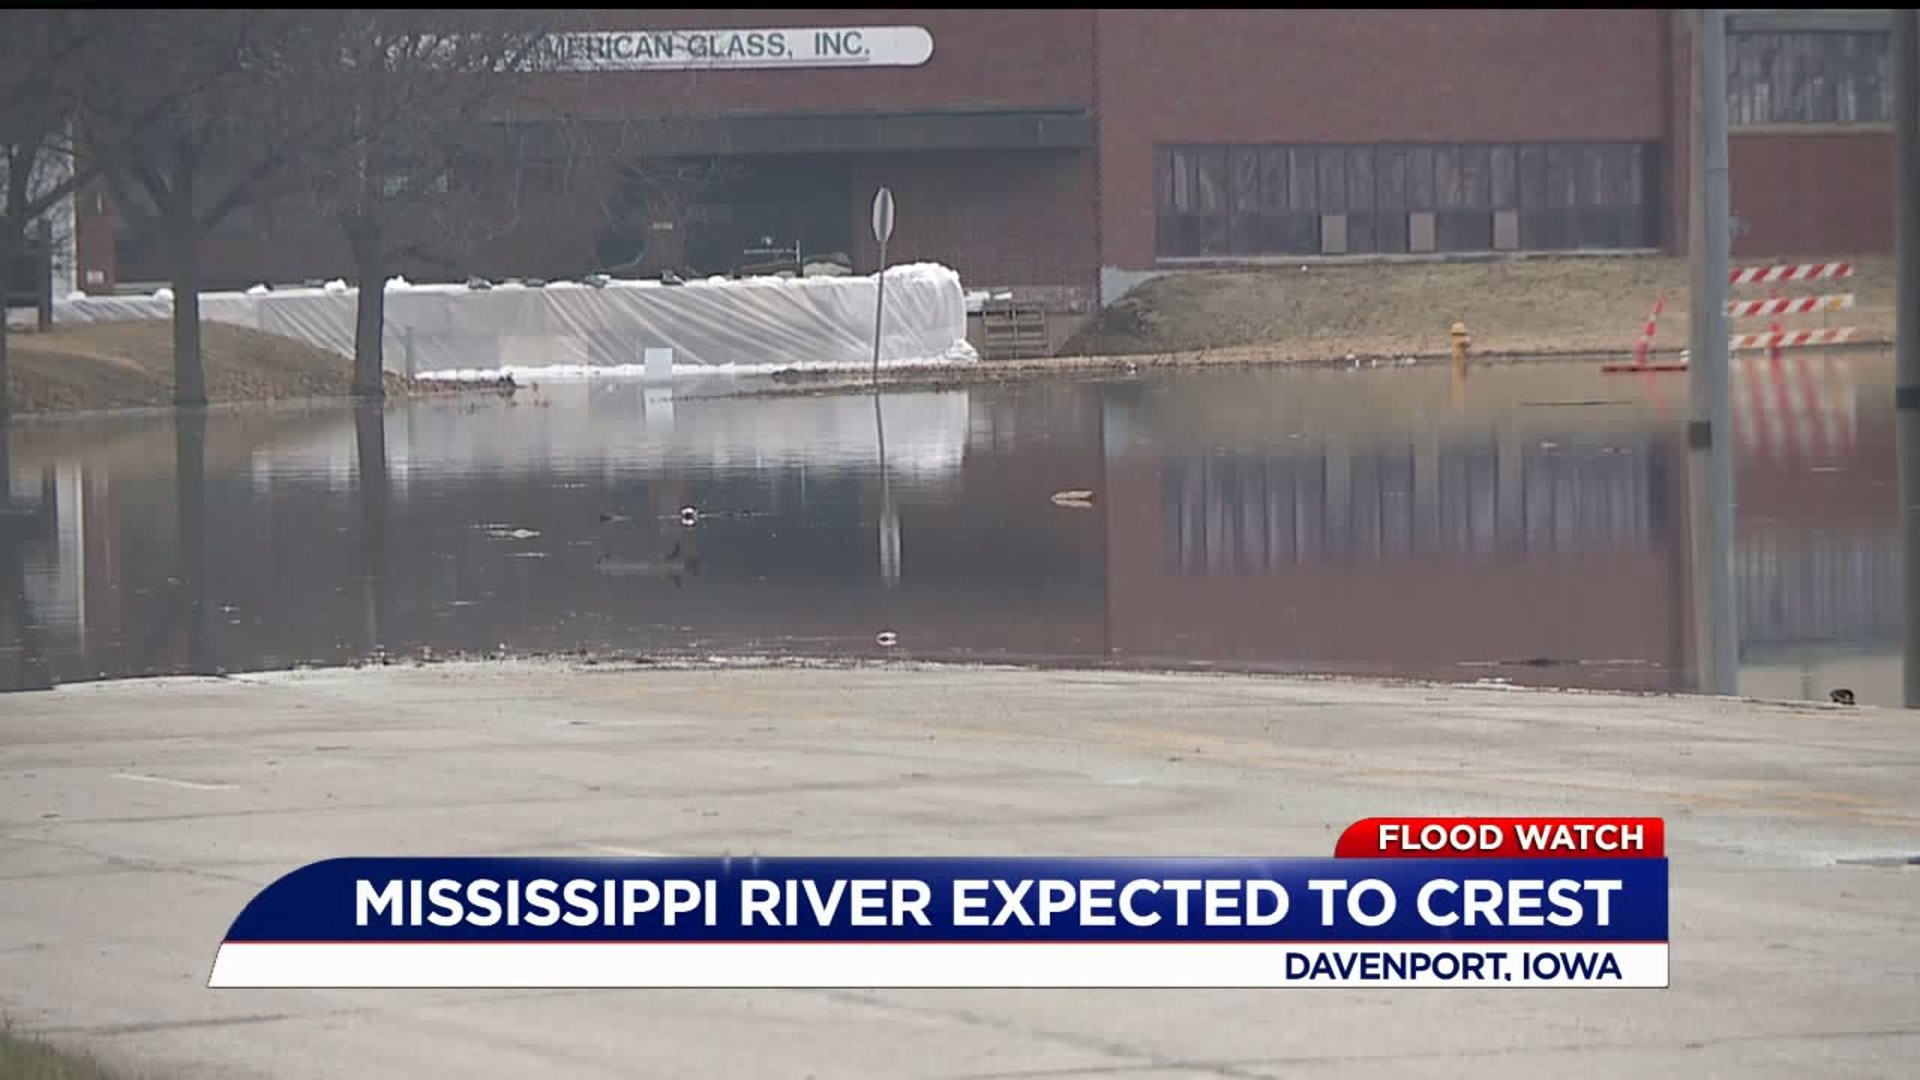 Flood Watch on the Mississippi River